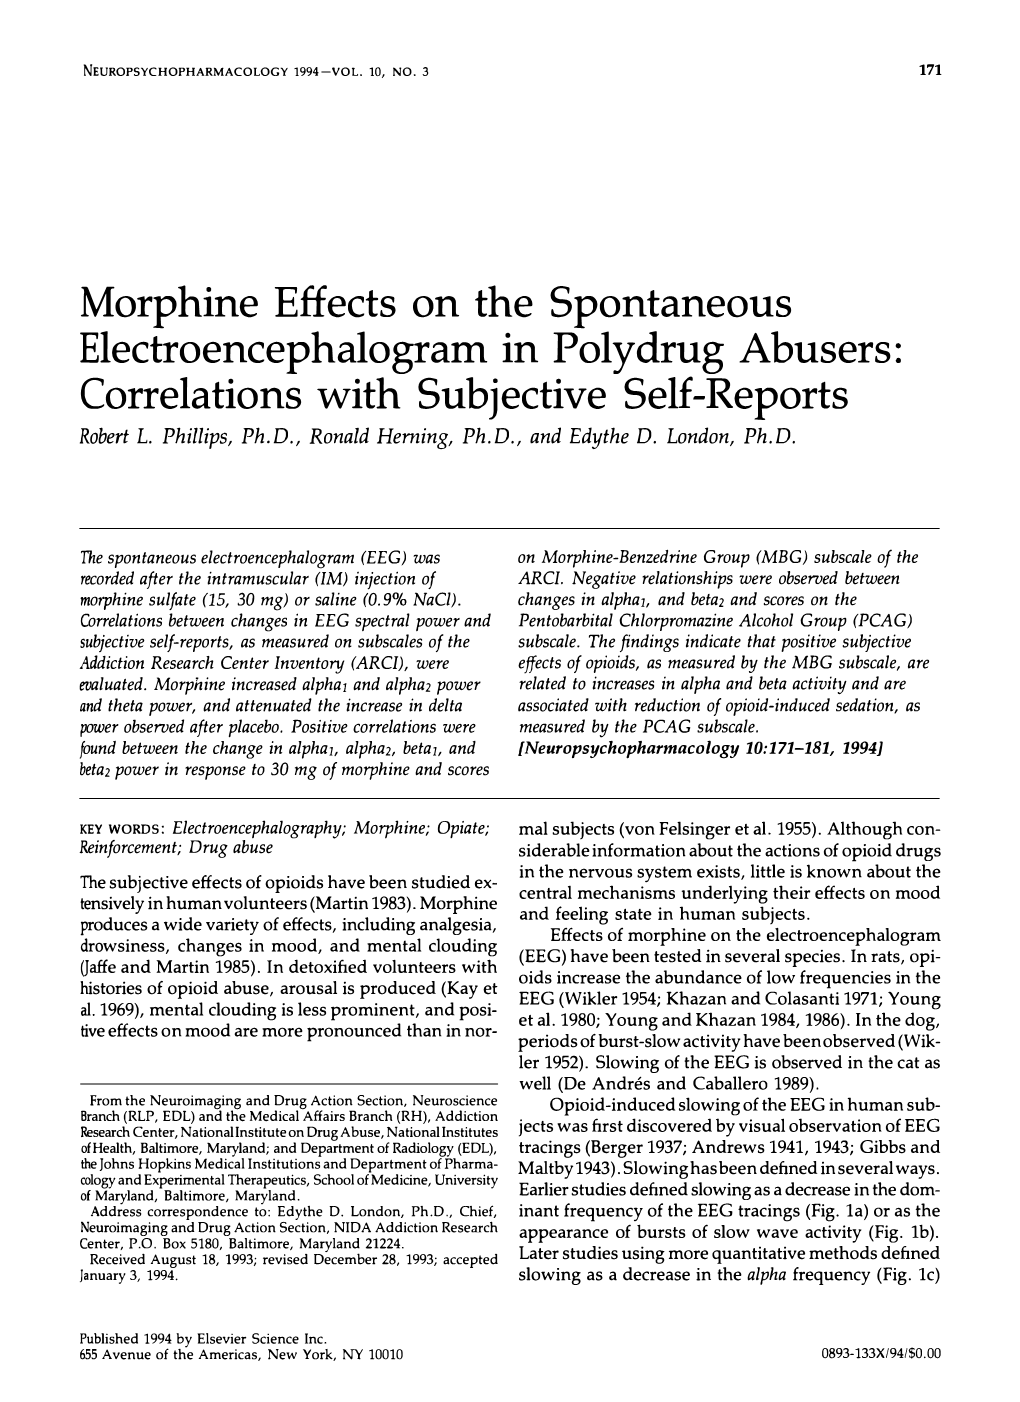 Morphine Effects on the Spontaneous Electroencephalogram in Polydrug Abusers: Correlations with Subjective Self-Reports Robert L